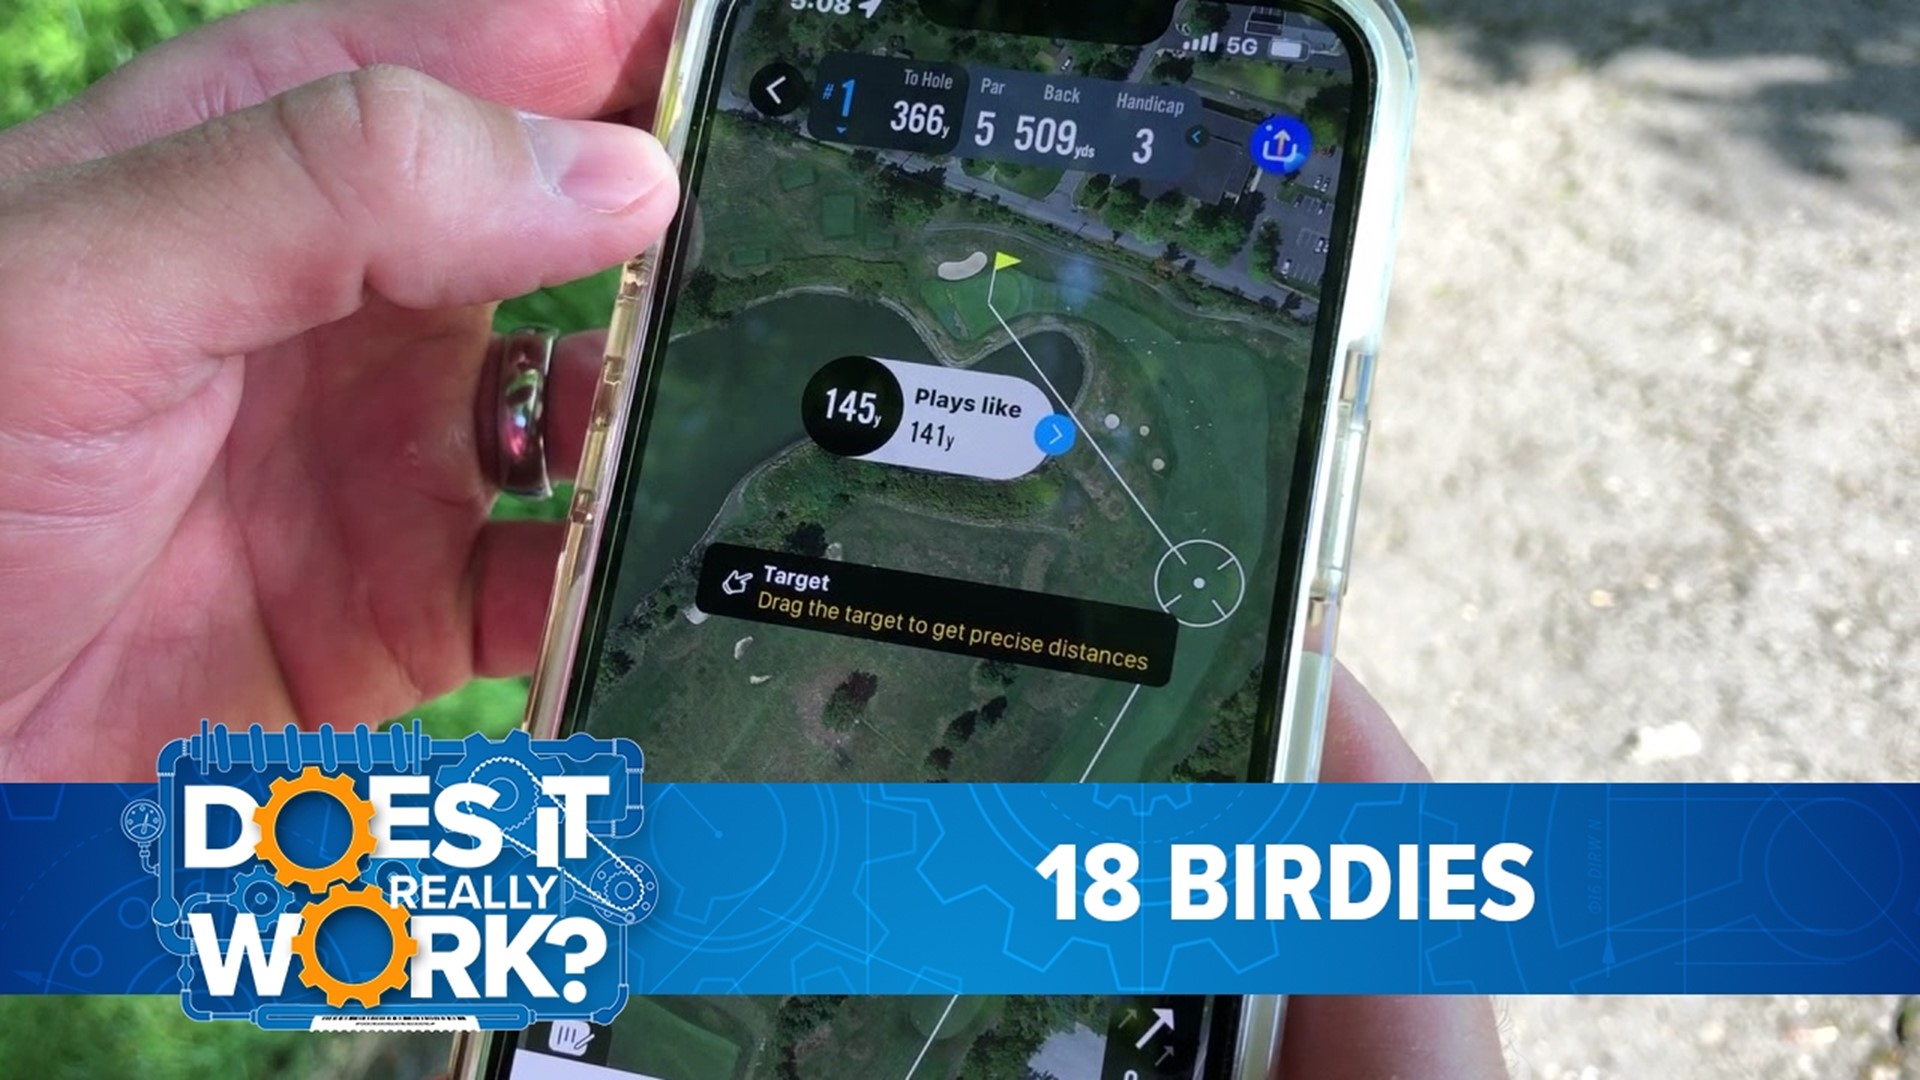 The maker claims that this app will help improve your golf game.